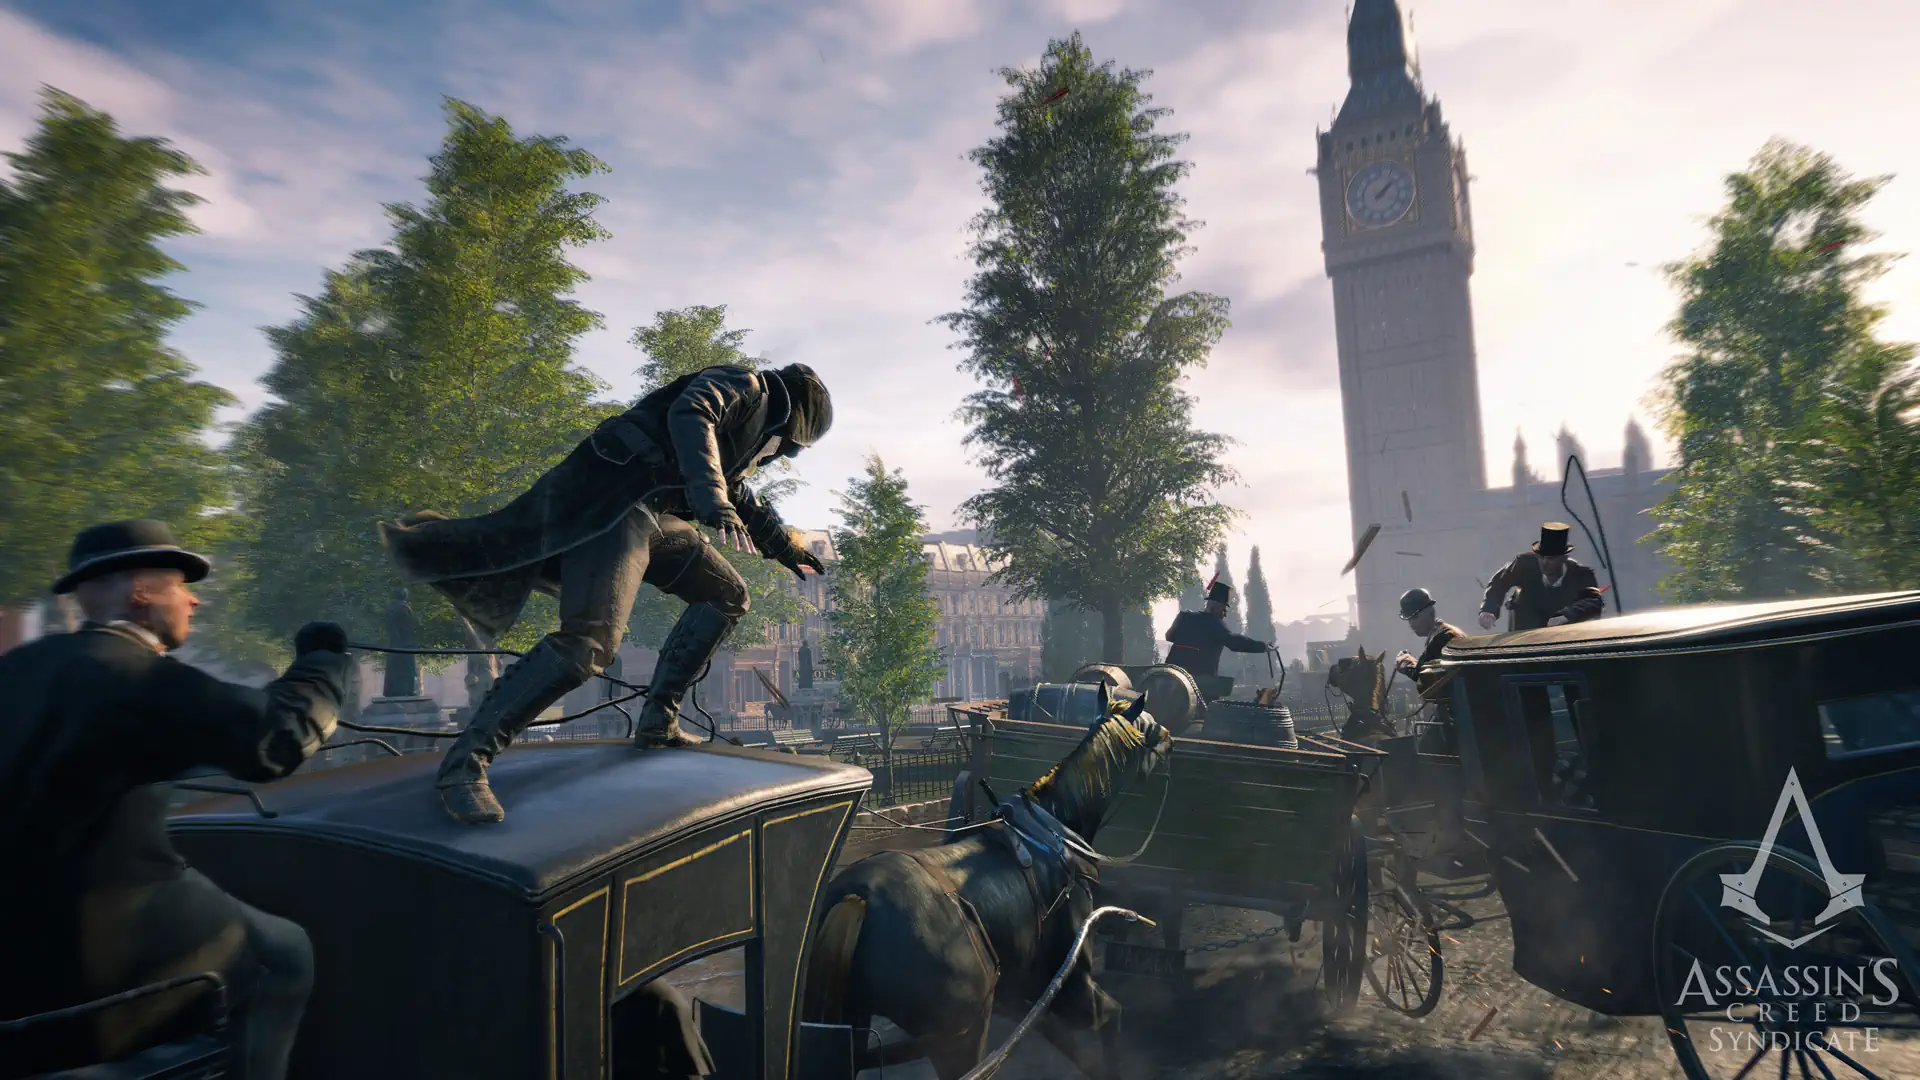 Hurry over to Ubisoft Connect because Assassin’s Creed Syndicate for PC is free to download until December 6th